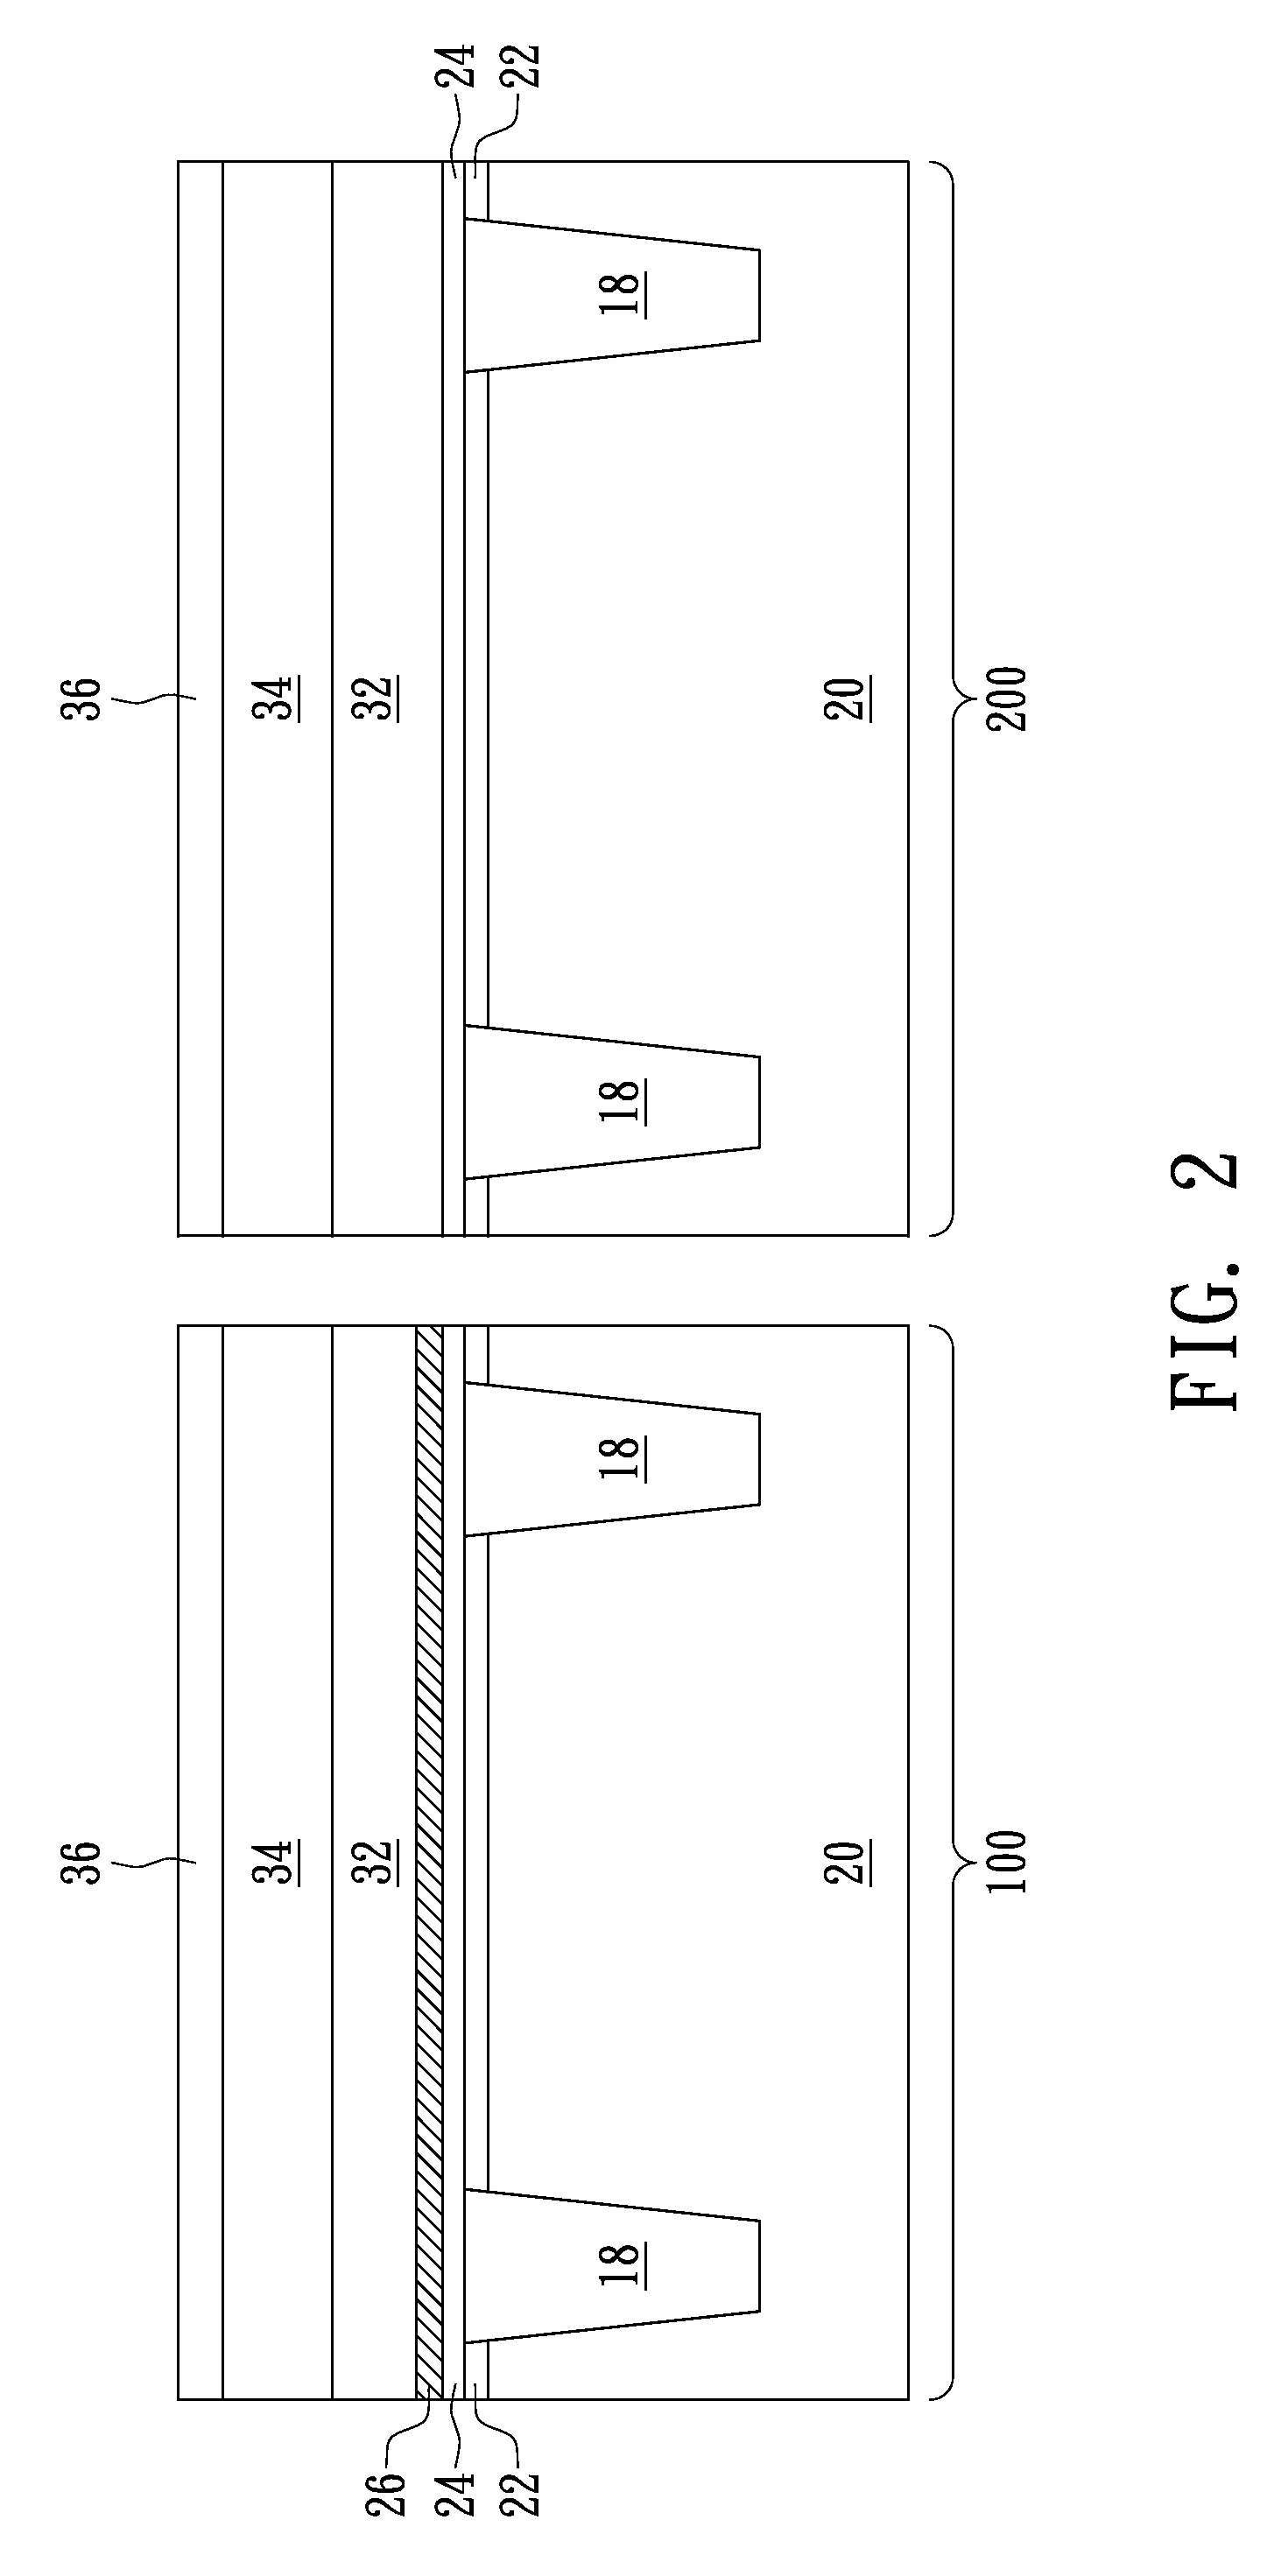 Hybrid Process for Forming Metal Gates of MOS Devices